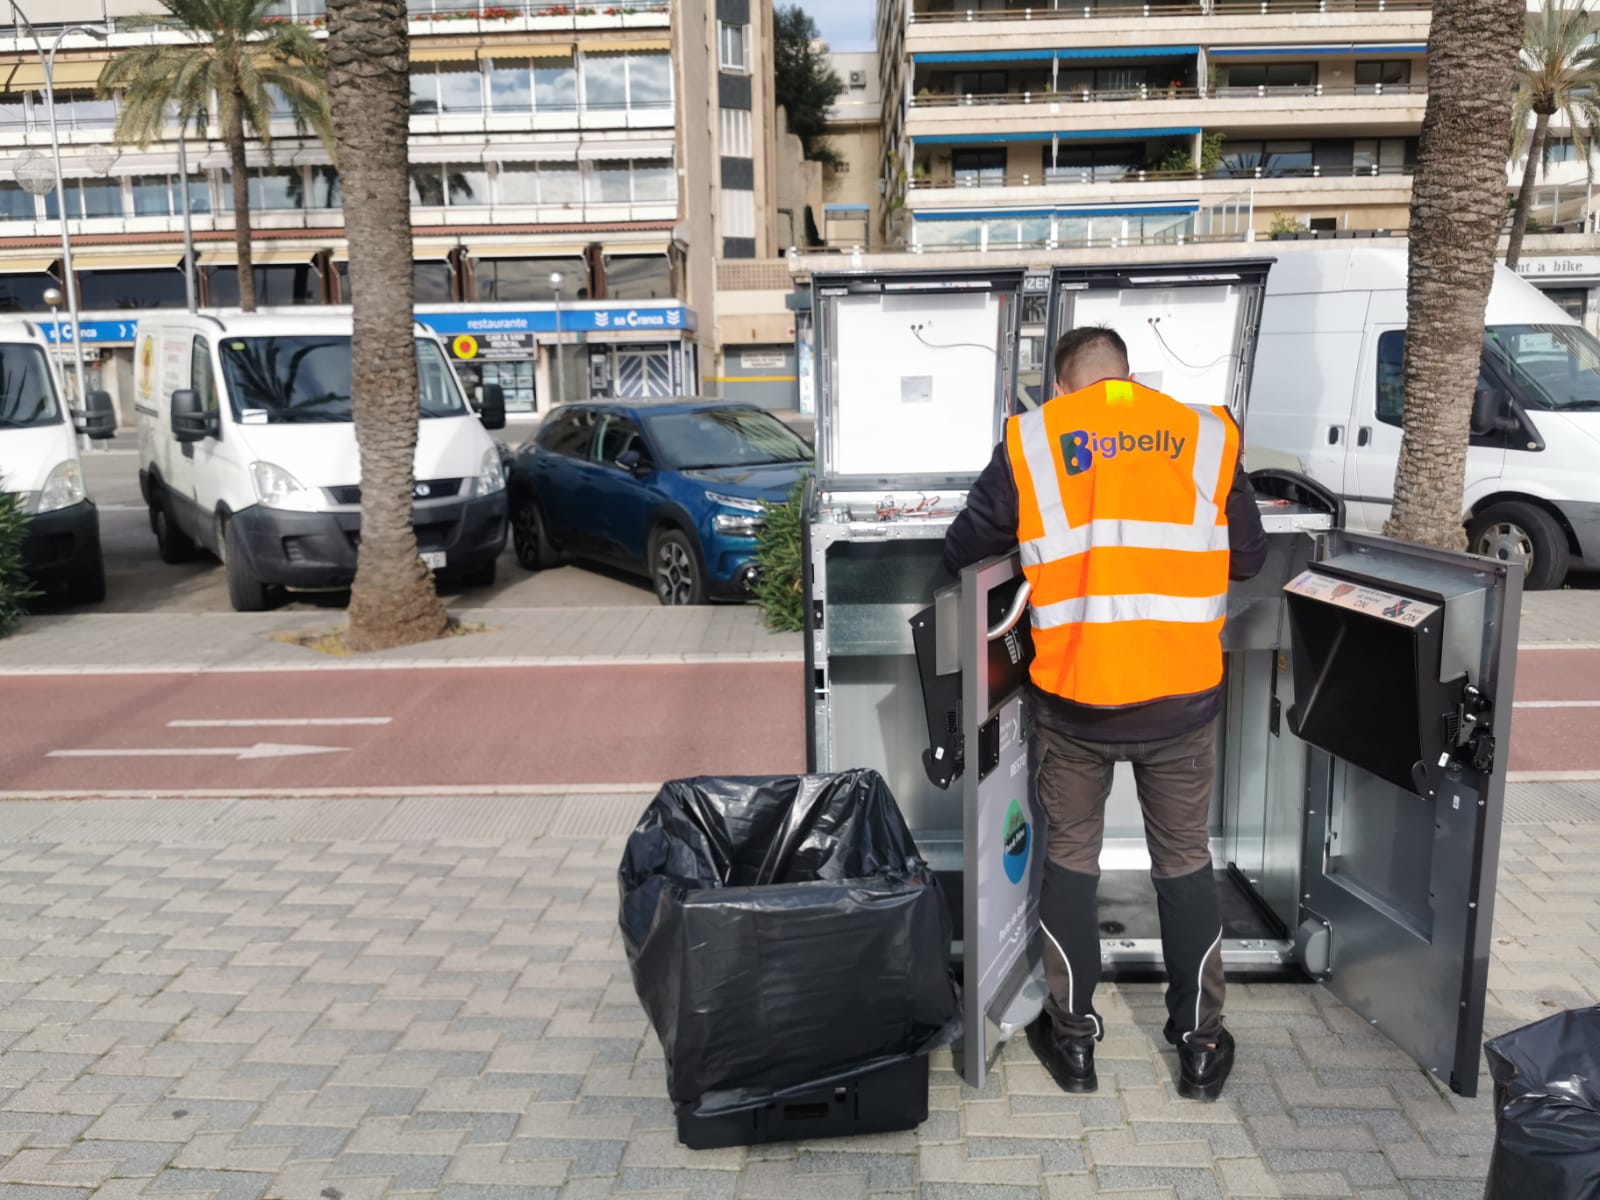 The Port of Palma puts twelve solar-powered compacting bins on its seafront promenade in a pilot environmental scheme 